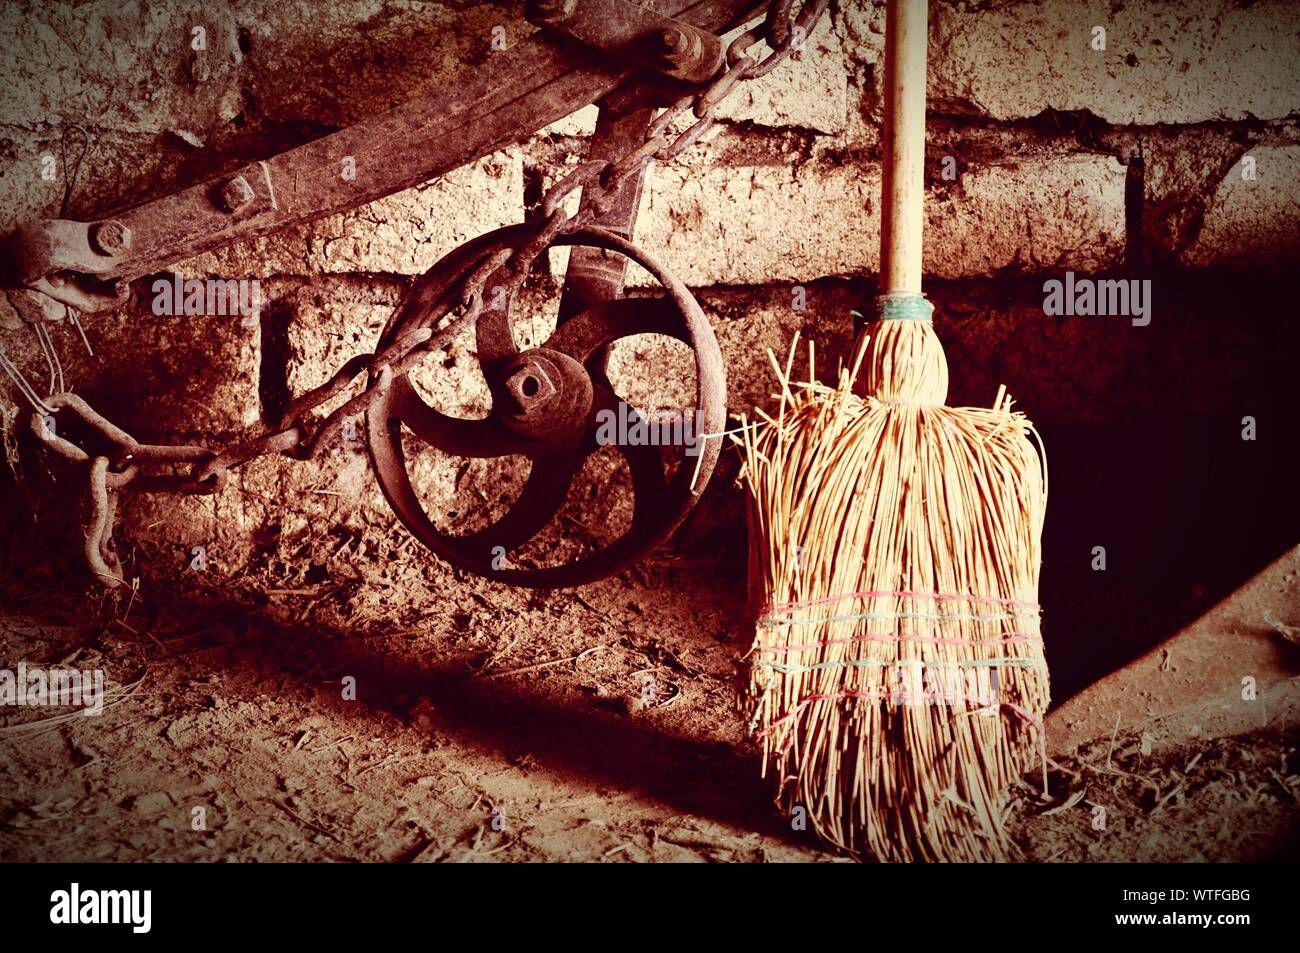 Damaged Sweep By Rusty Wheel In Storehouse Stock Photo